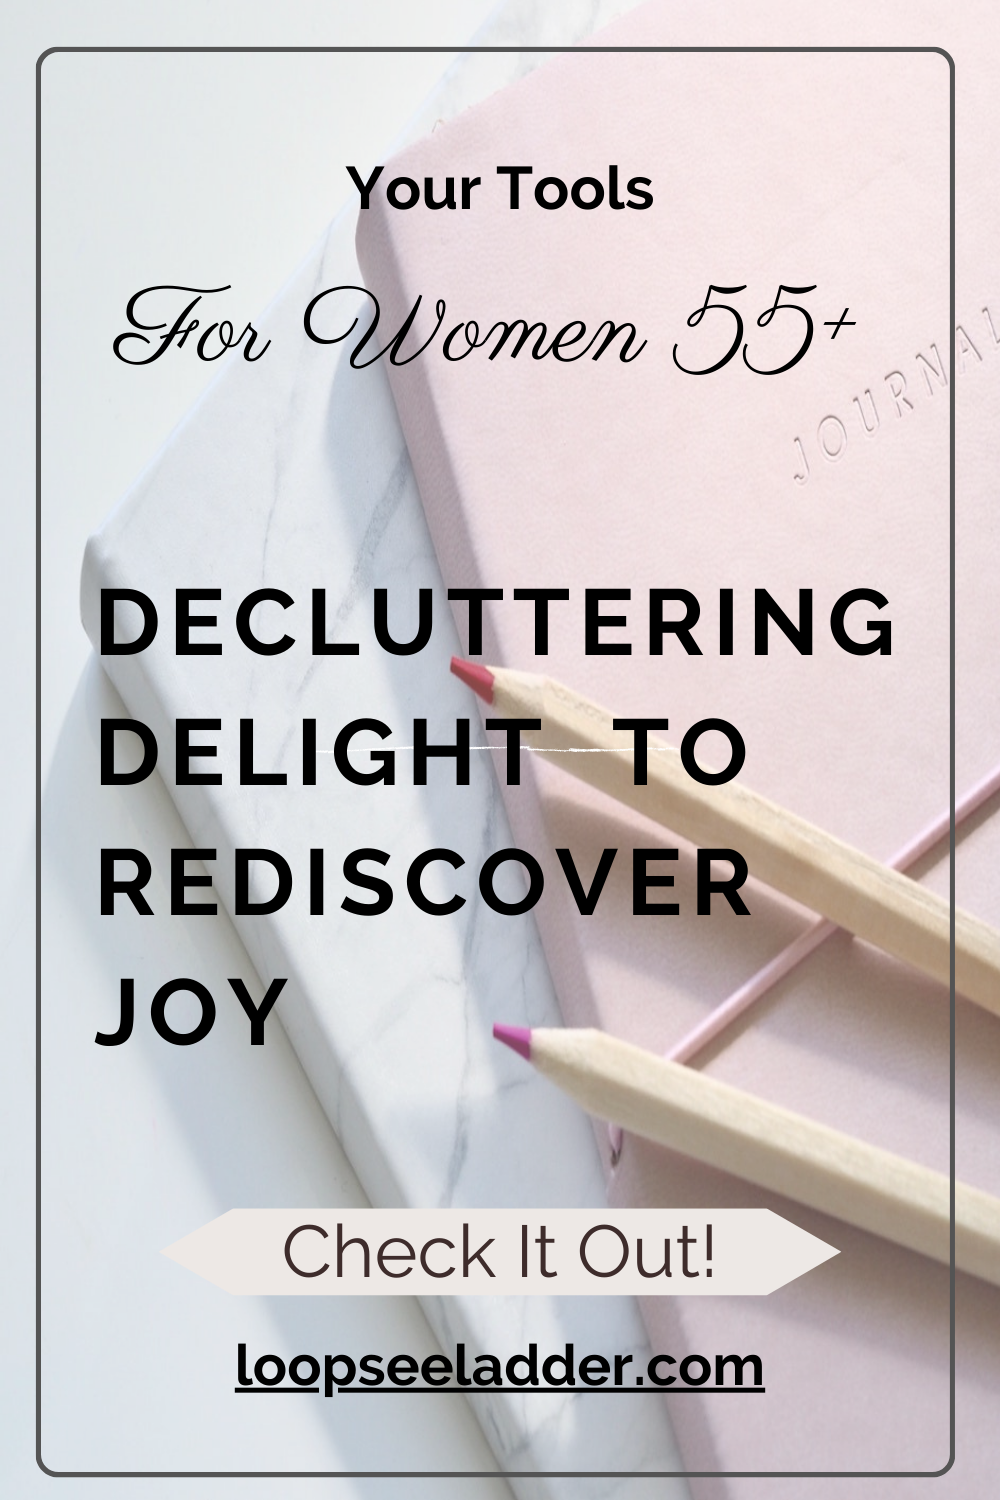 Decluttering Delight: How Women 55+ Can Rediscover Joy in Their Homes